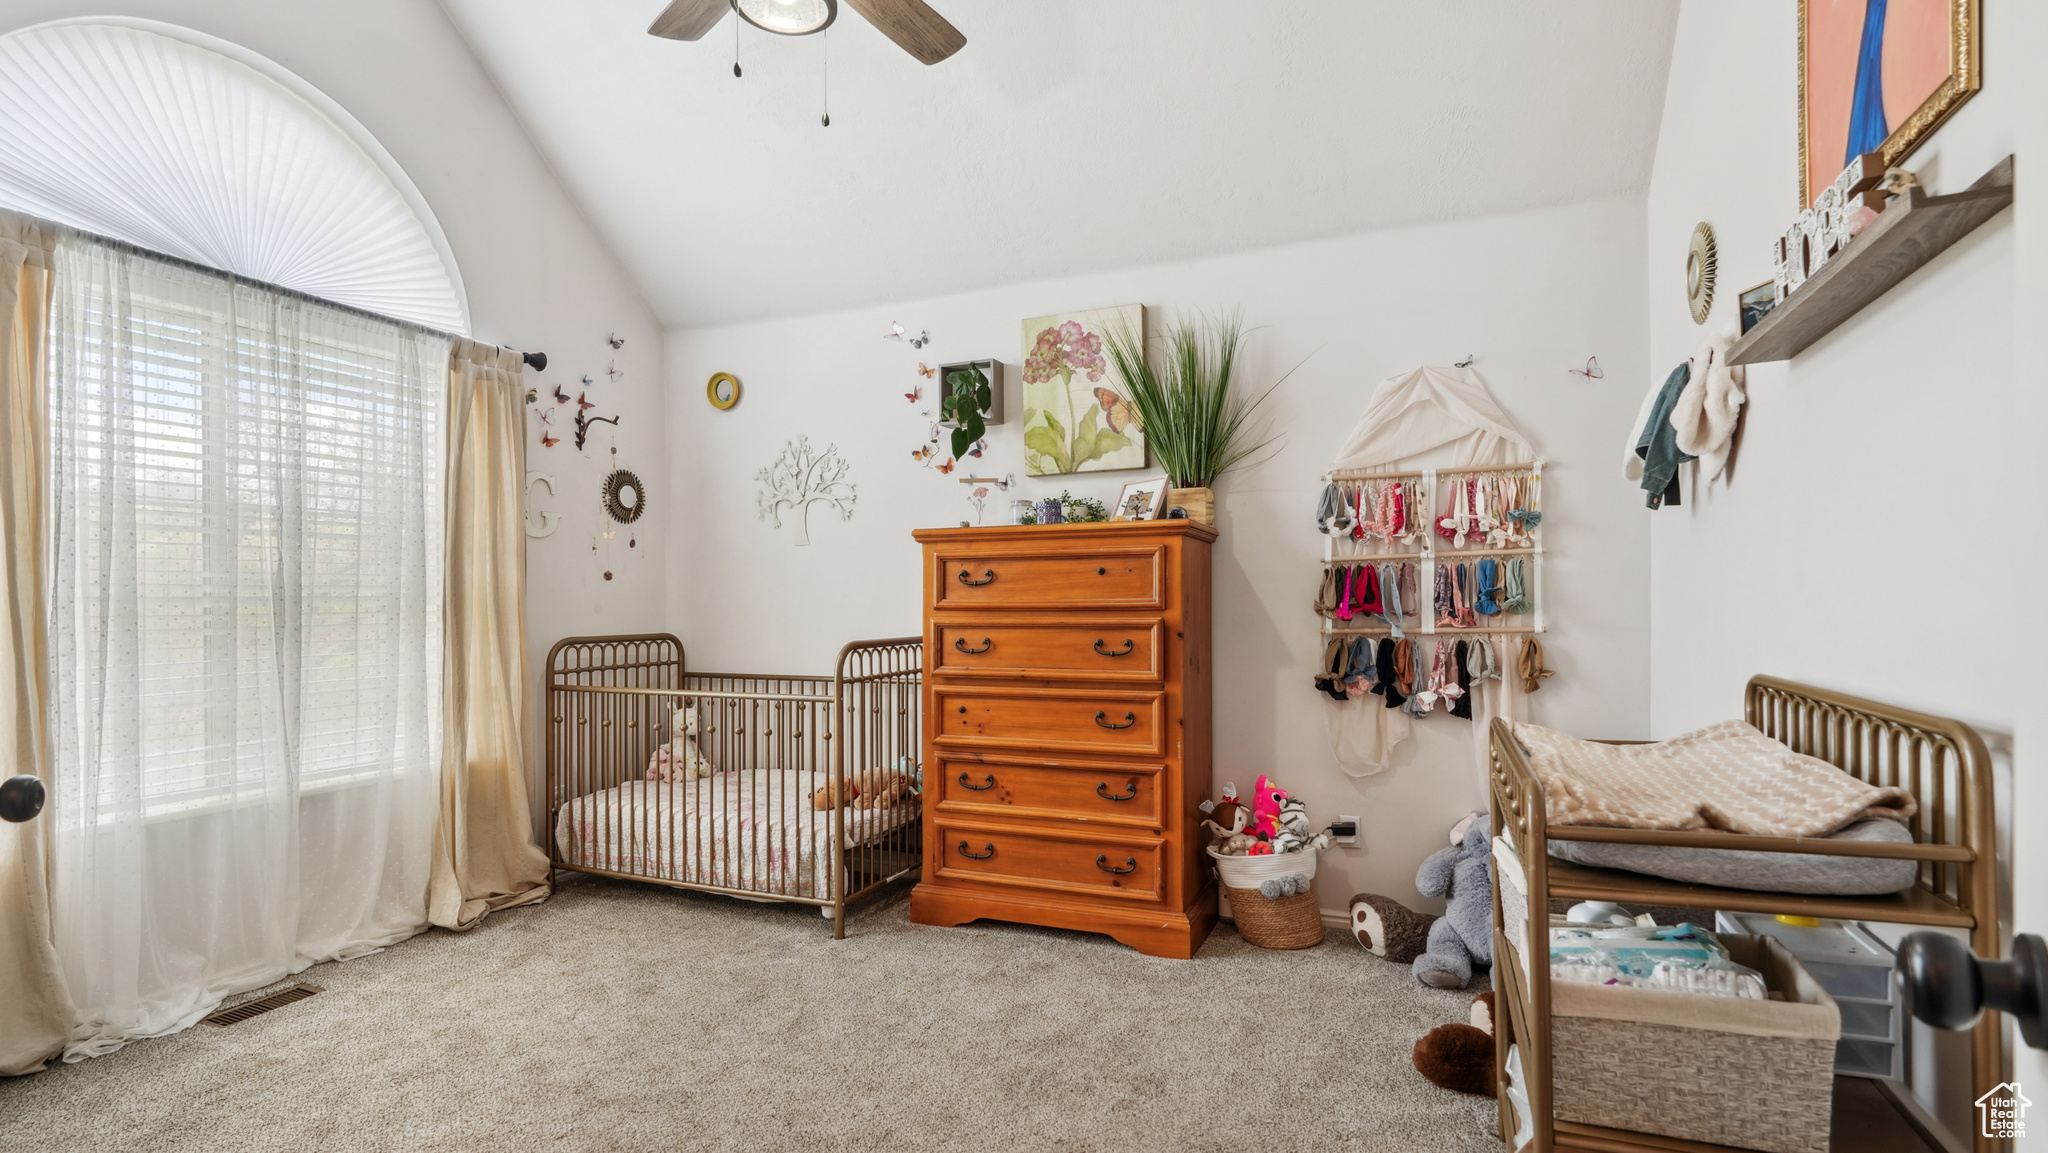 Office or Bedroom featuring ceiling fan, a crib, carpet floors, and lofted ceiling. No closet in this room.